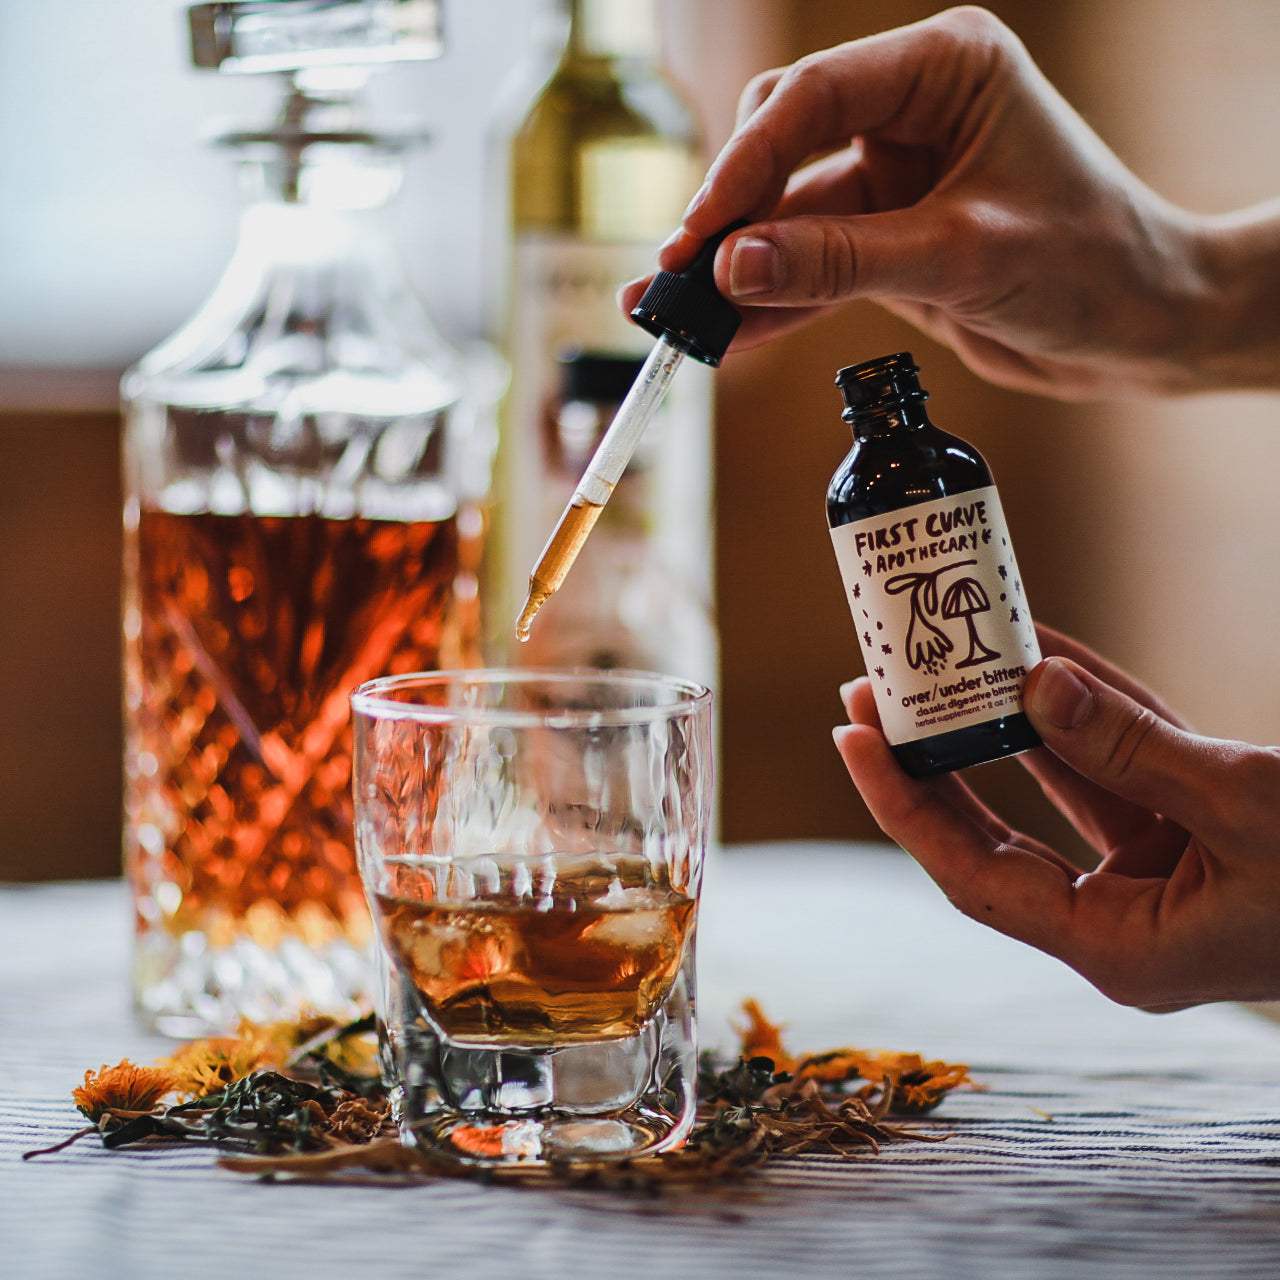 Bitters: An Herbalist's Perspective, Part 1 - Herbcraft in the Lineage of Bitter